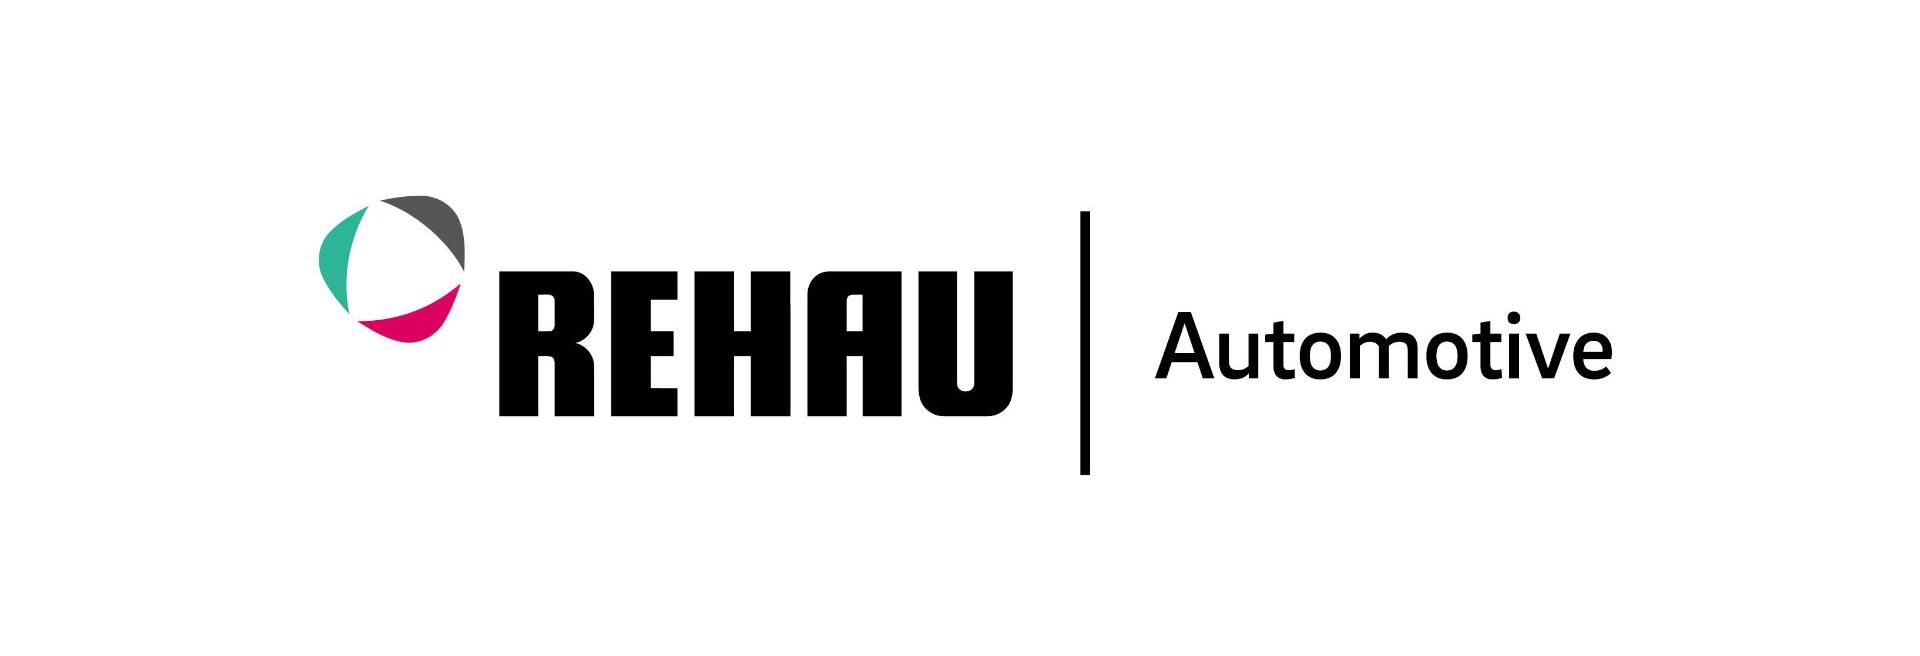 State-Of-The-Art Auto Part Manufacturing Plant Inaugurated by REHAU in Újhartyán - VIDEO REPORT